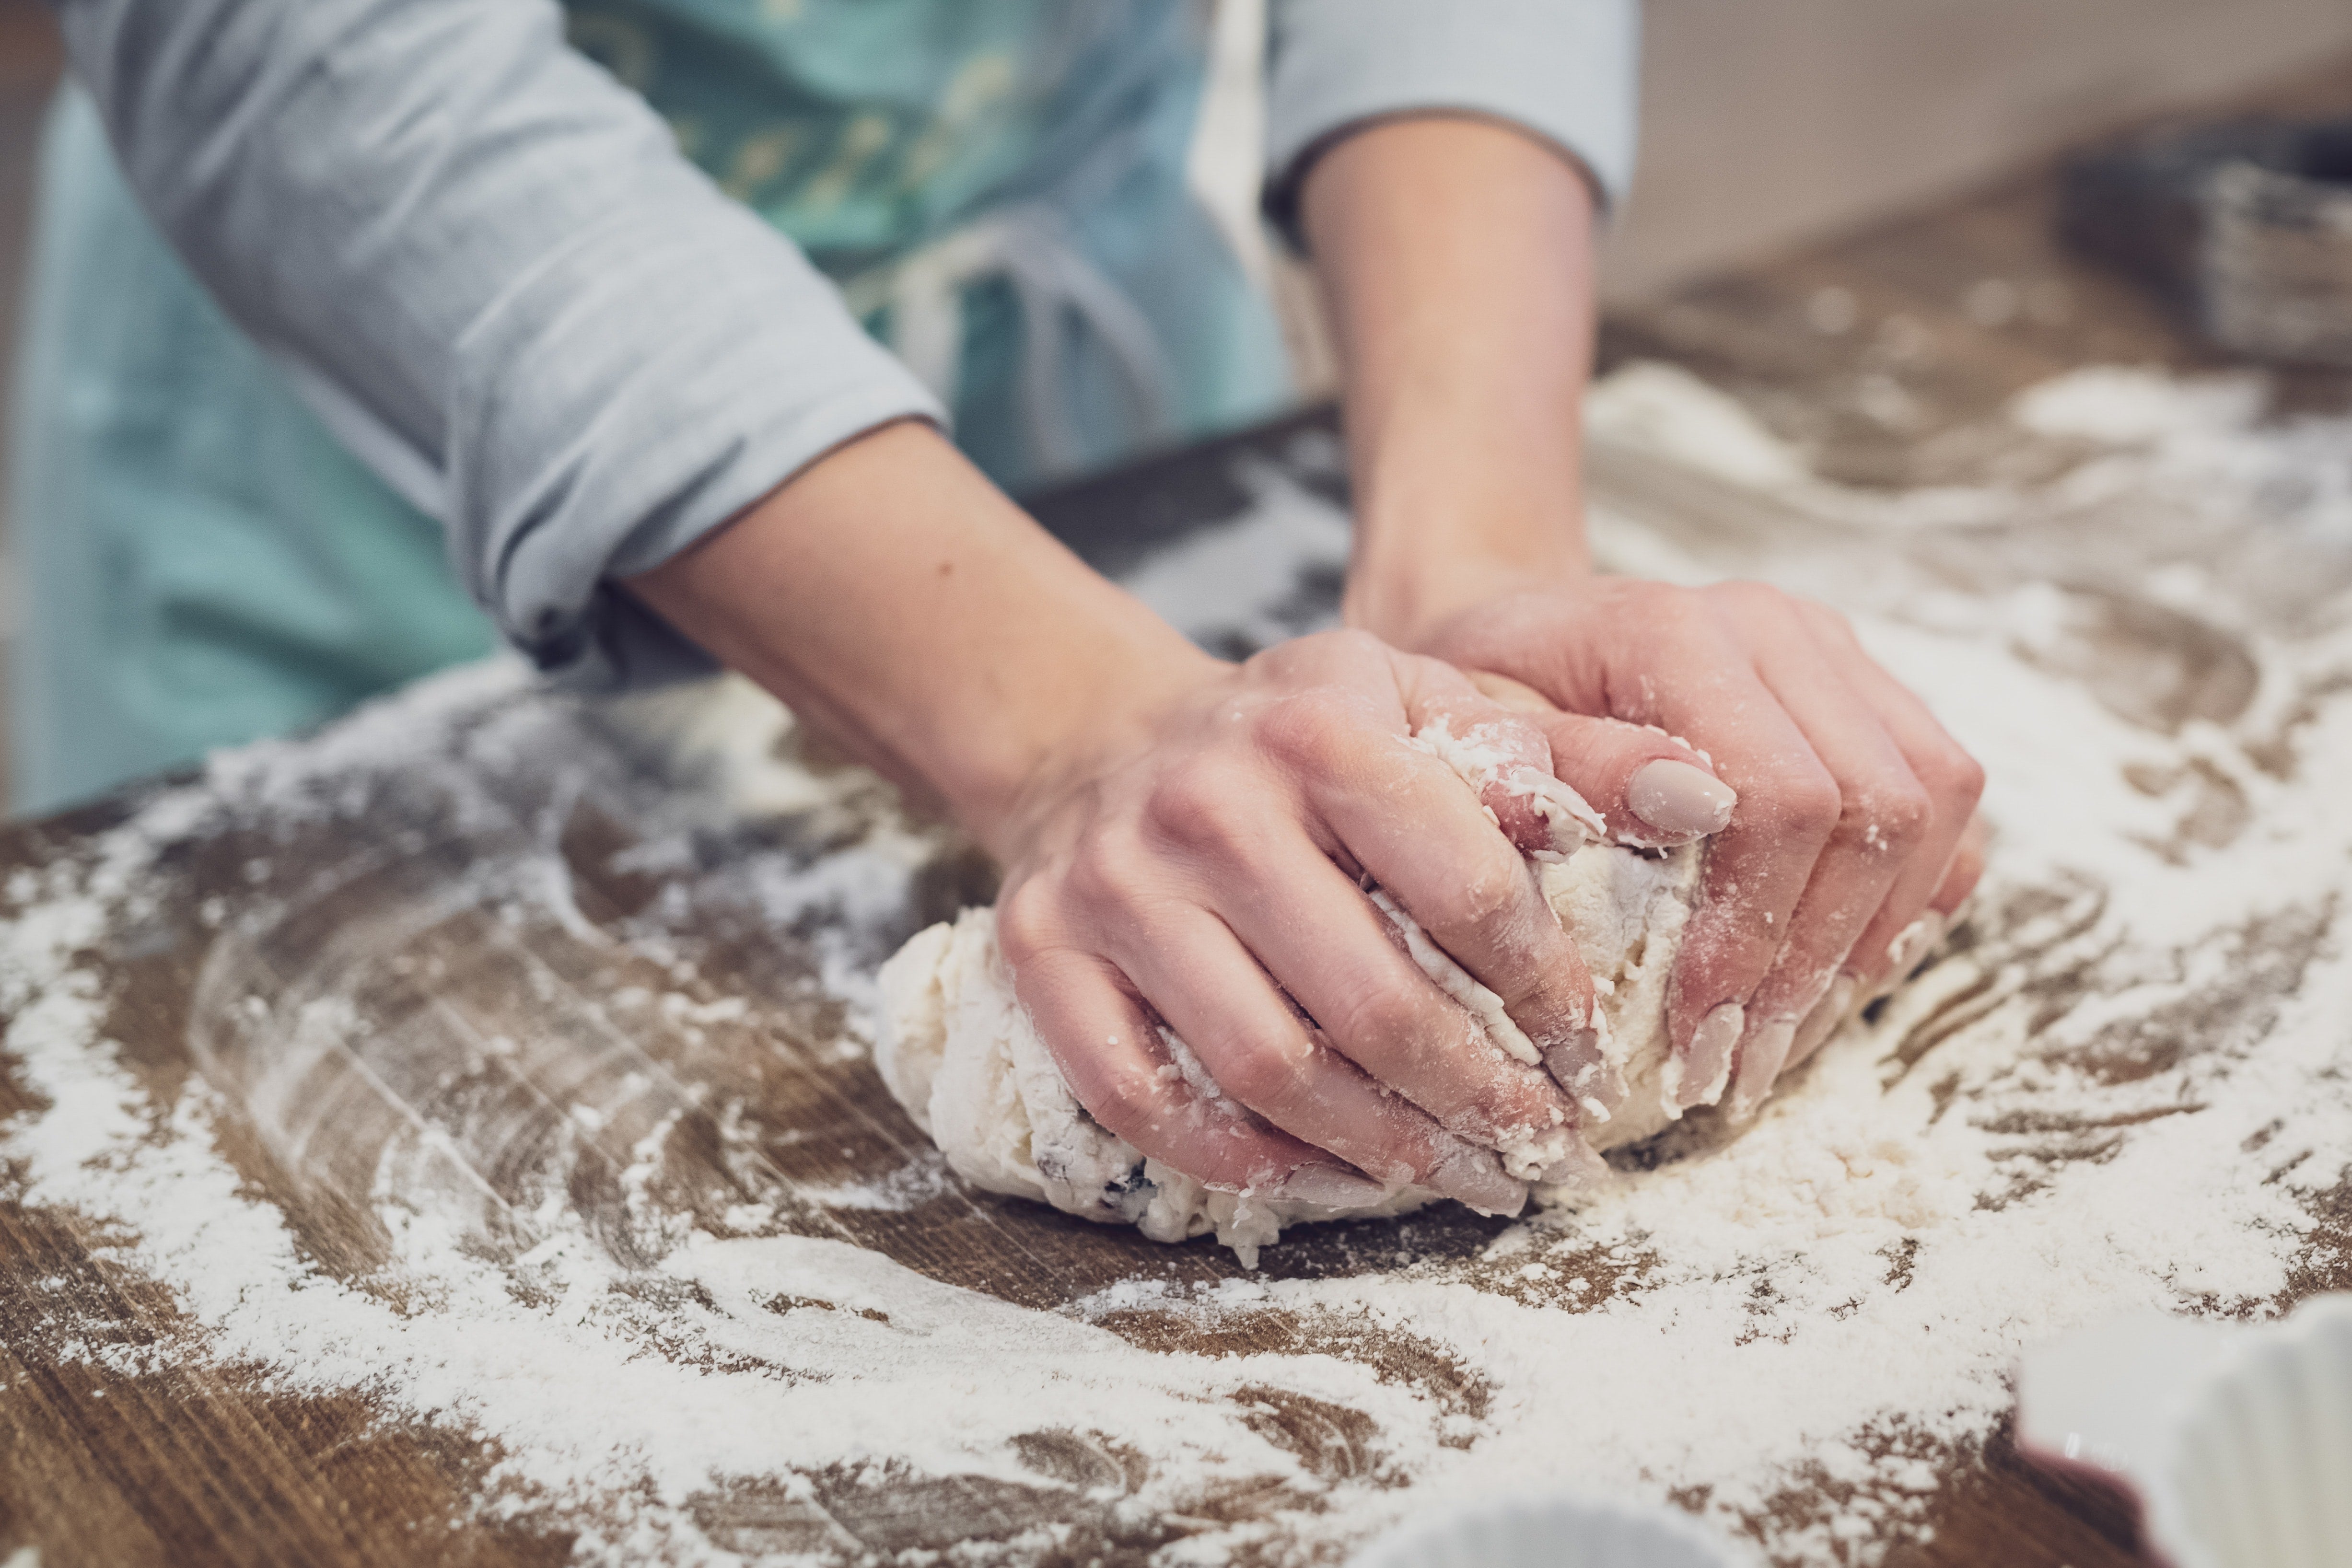 A pair of hands kneads a ball of dough on well-floured wooden surface.